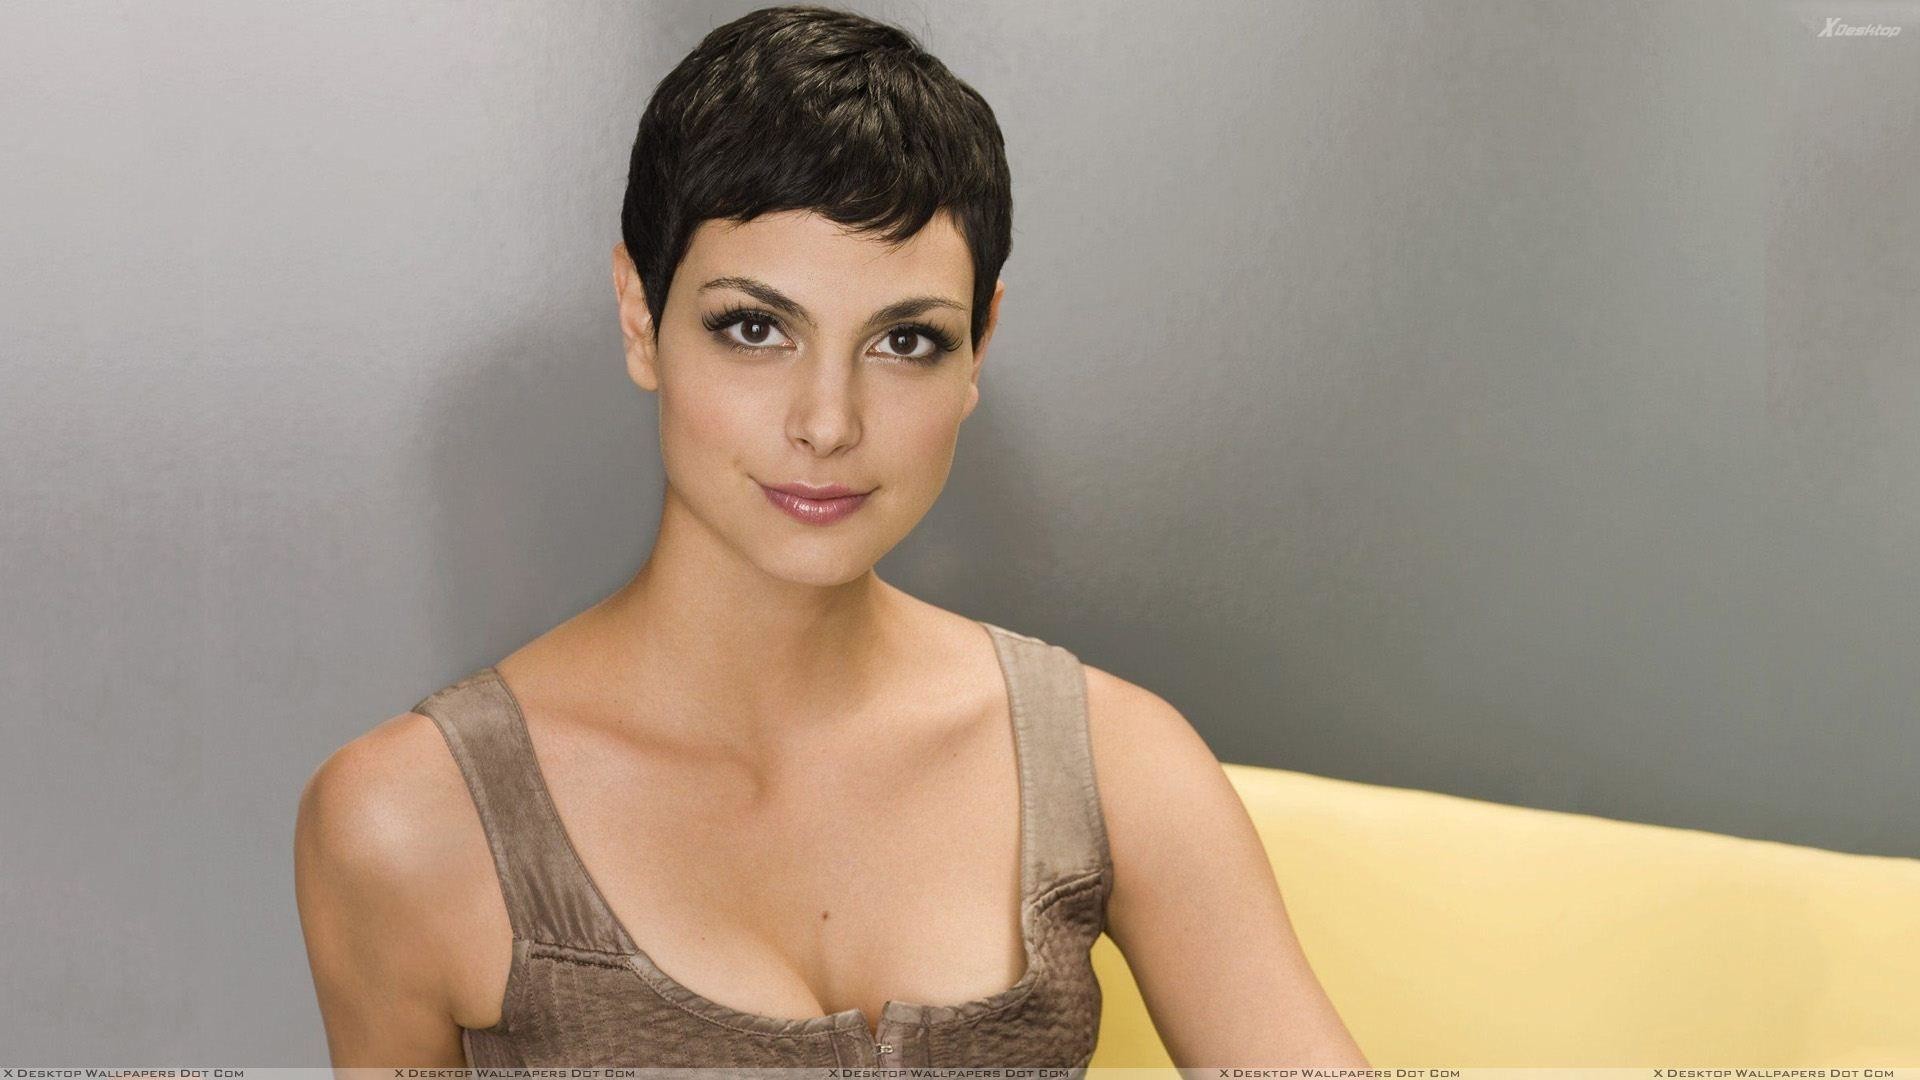 1920x1080 Morena Baccarin Wallpapers, Photos & Images in HD